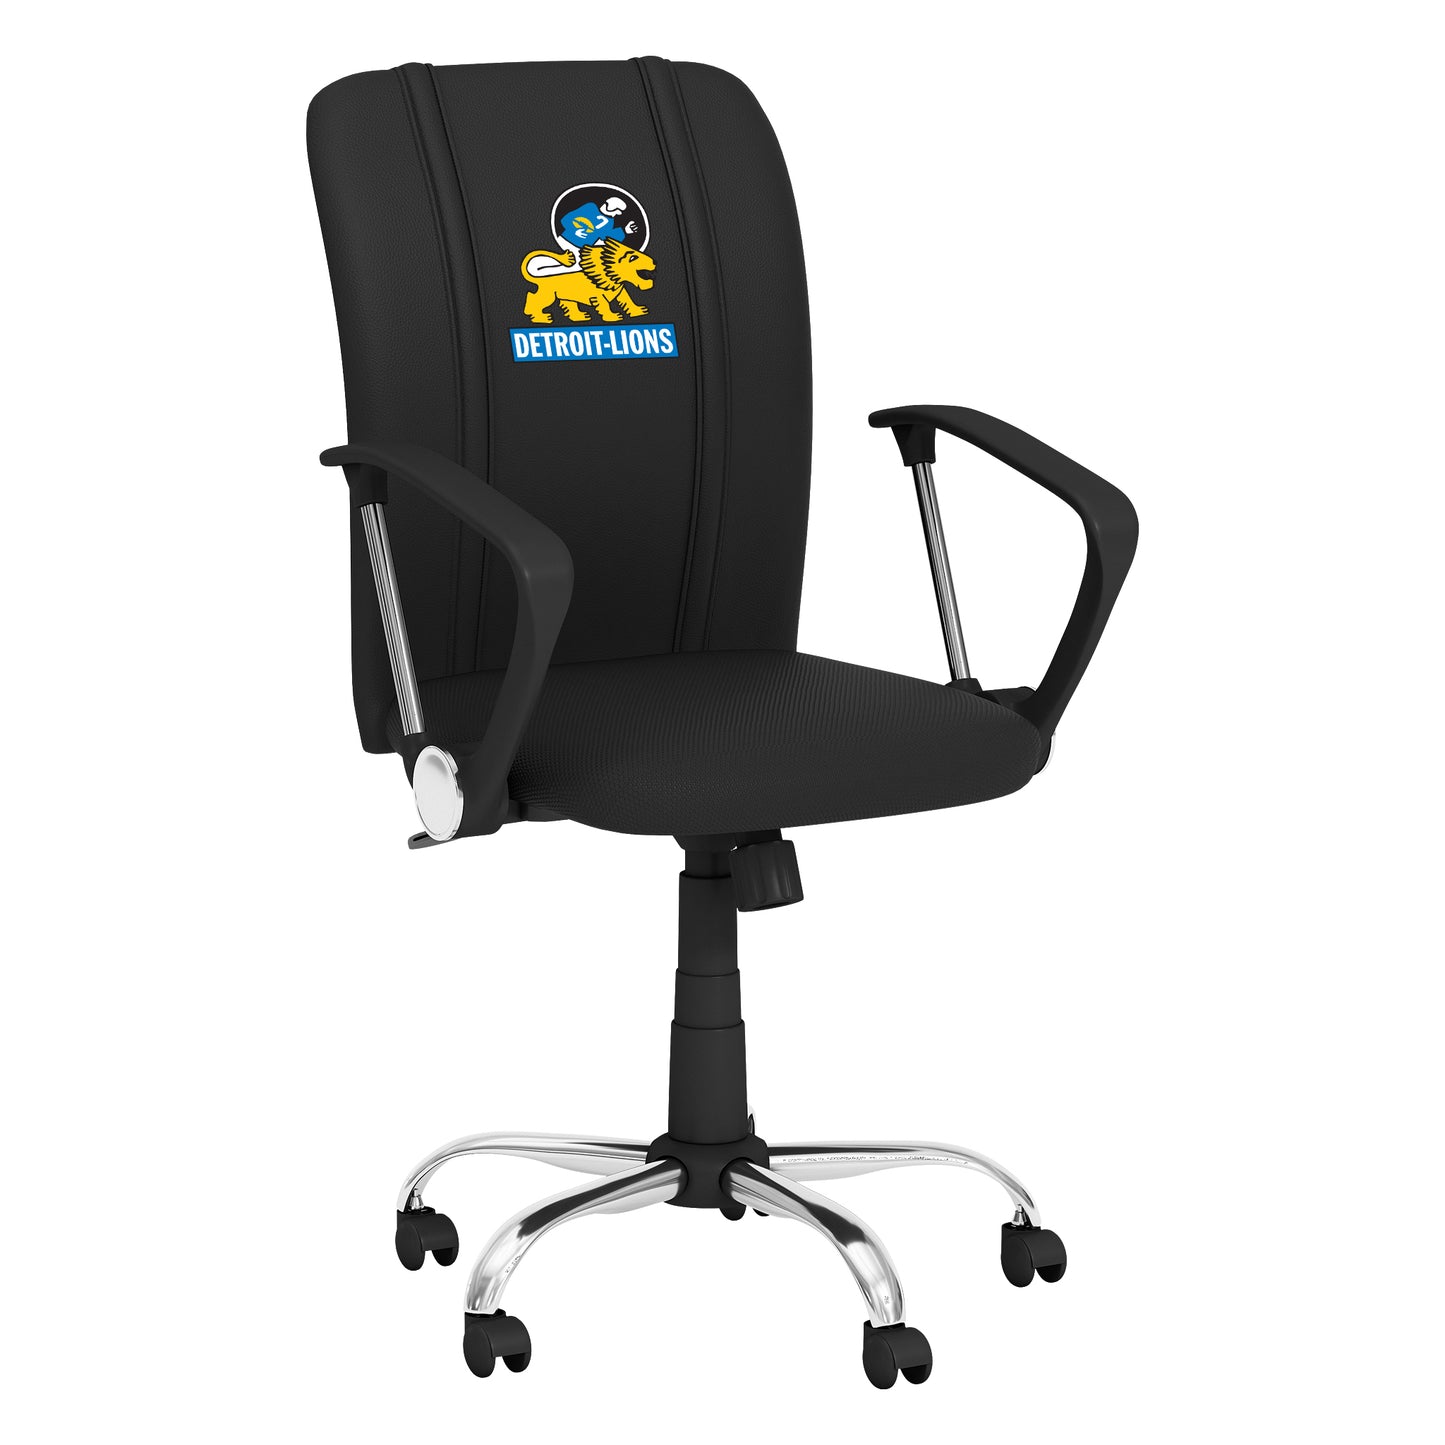 Curve Task Chair with Detroit Lions Classic Logo